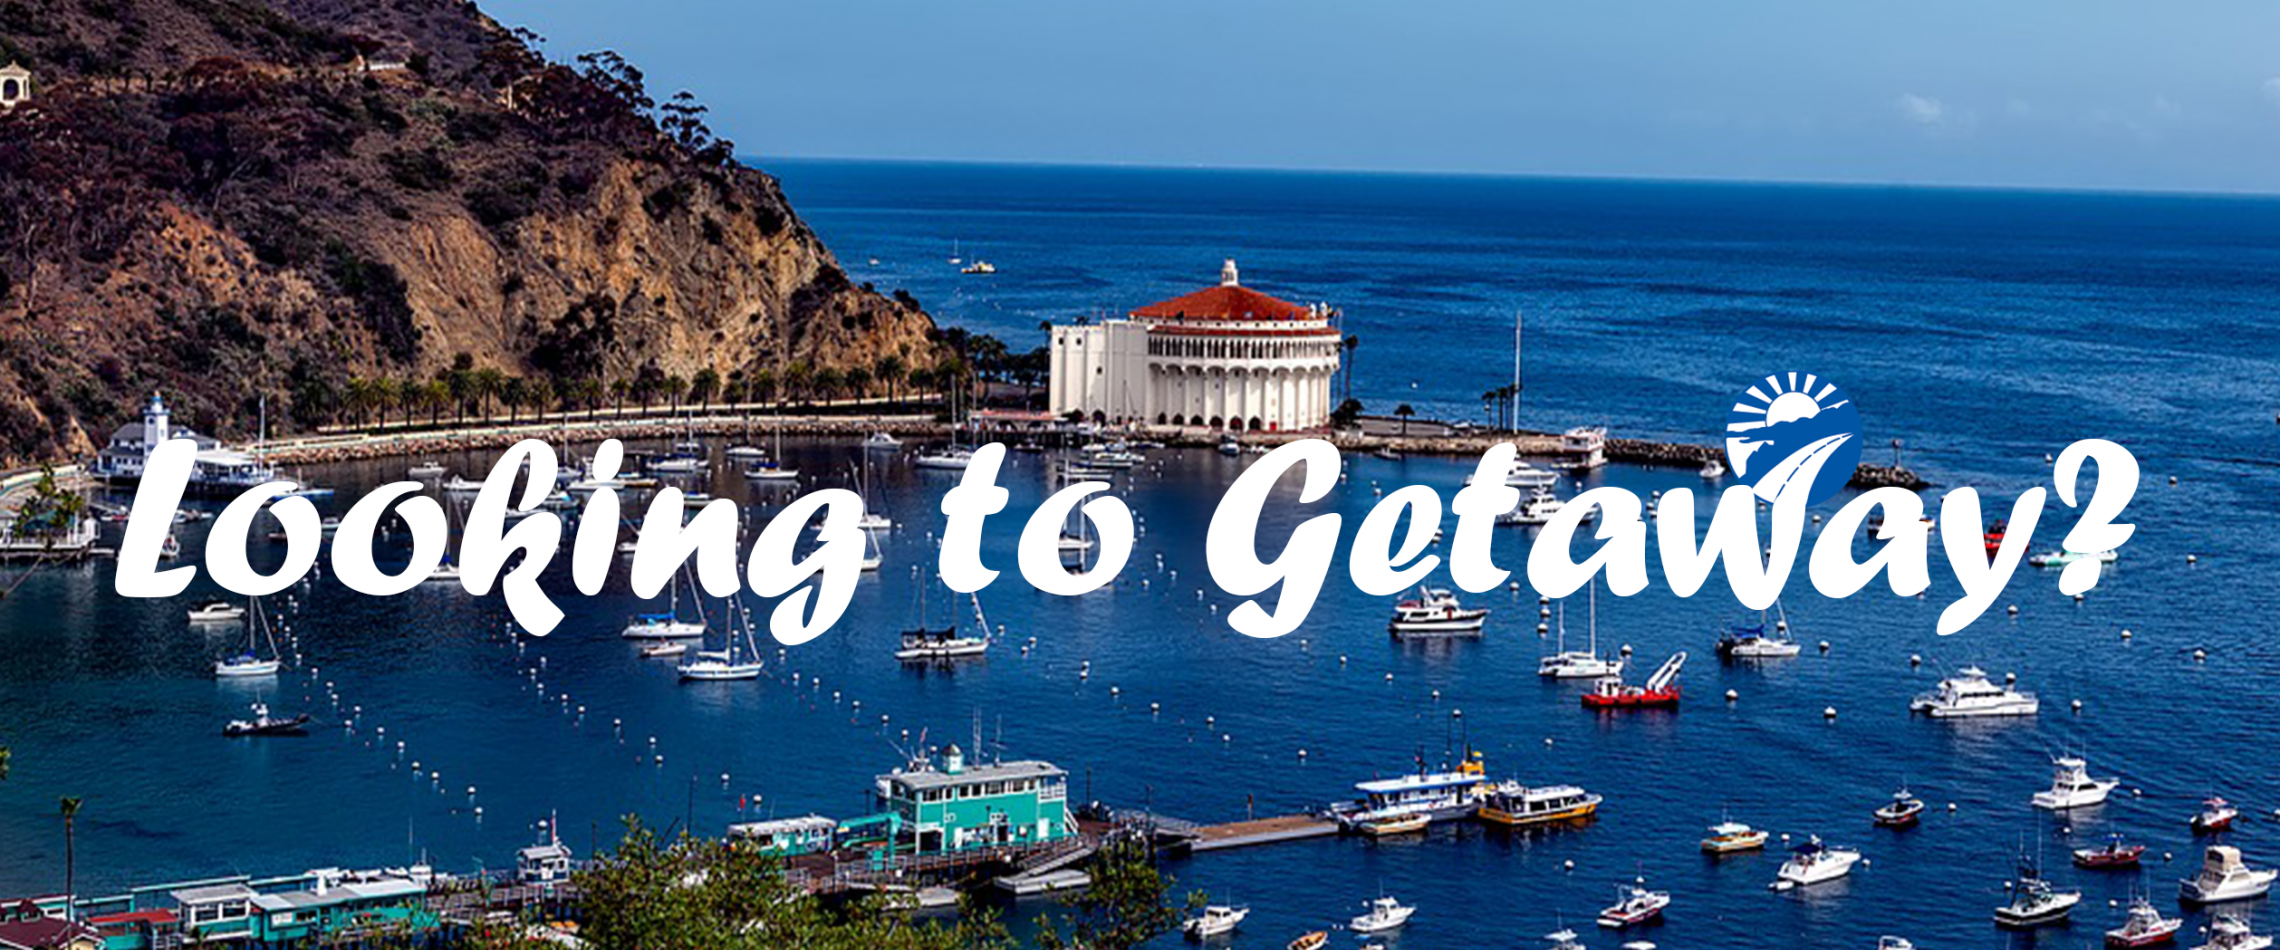 Image of Catalina Island with text "Looking to Getaway?"